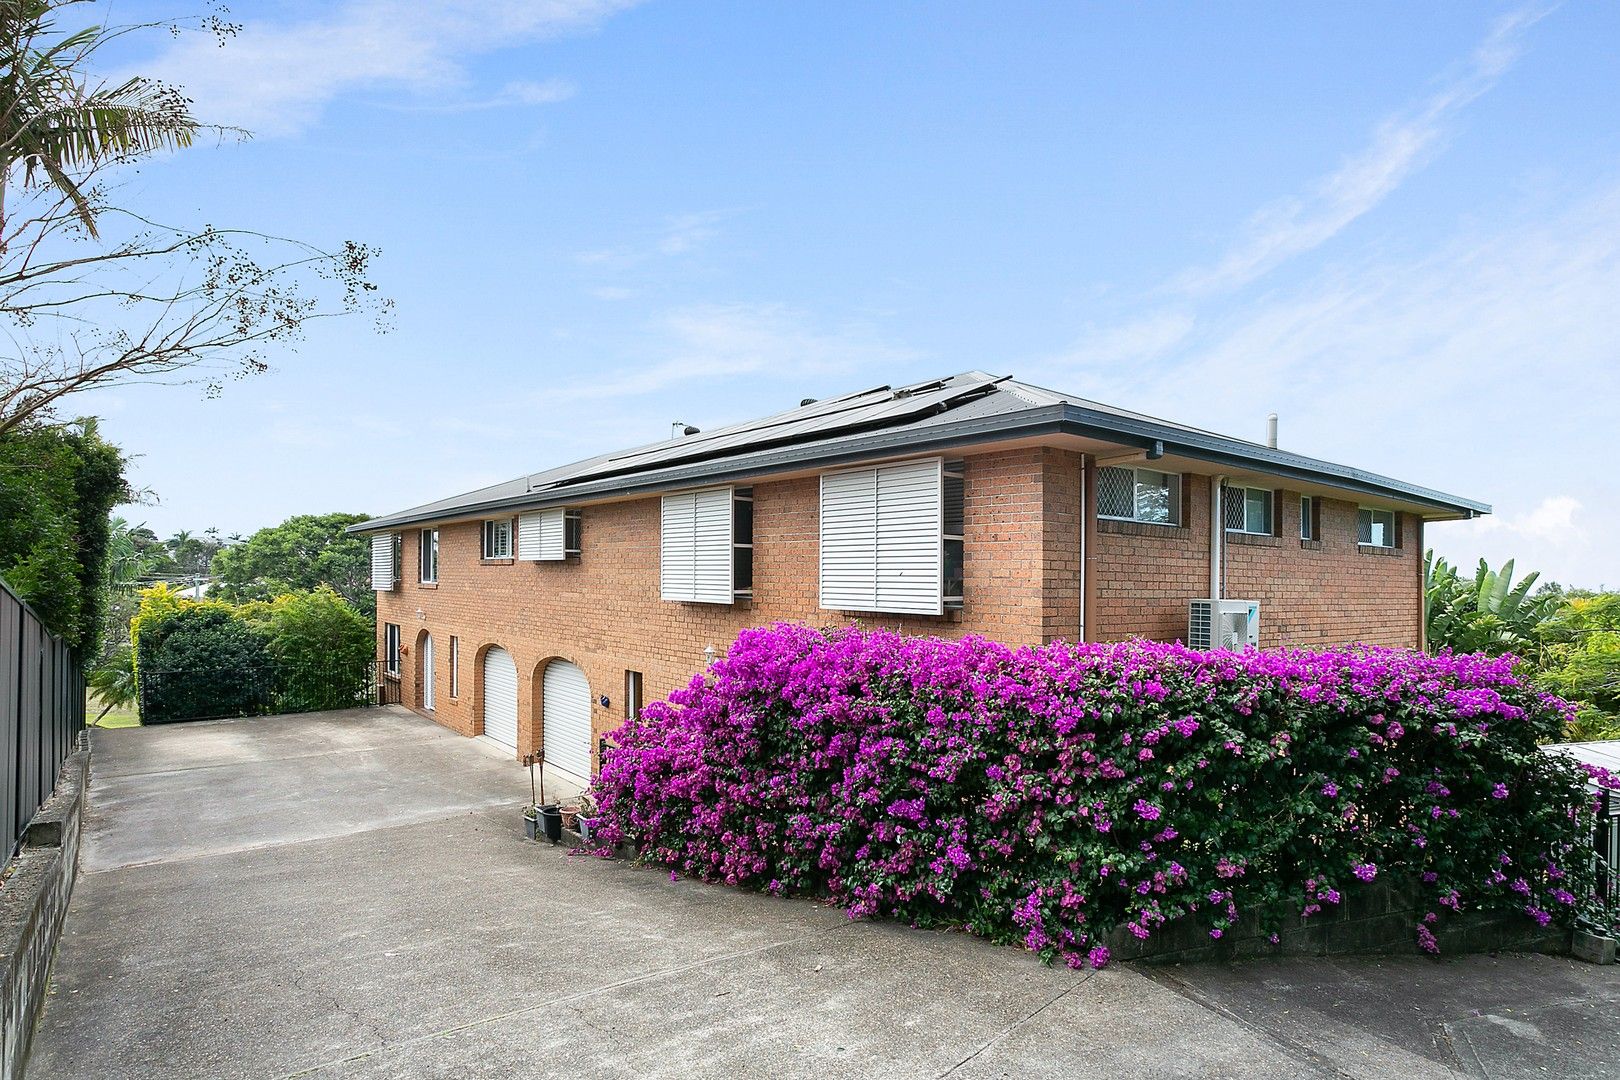 4 bedrooms Semi-Detached in 2/4 Quirk Place KINGSCLIFF NSW, 2487